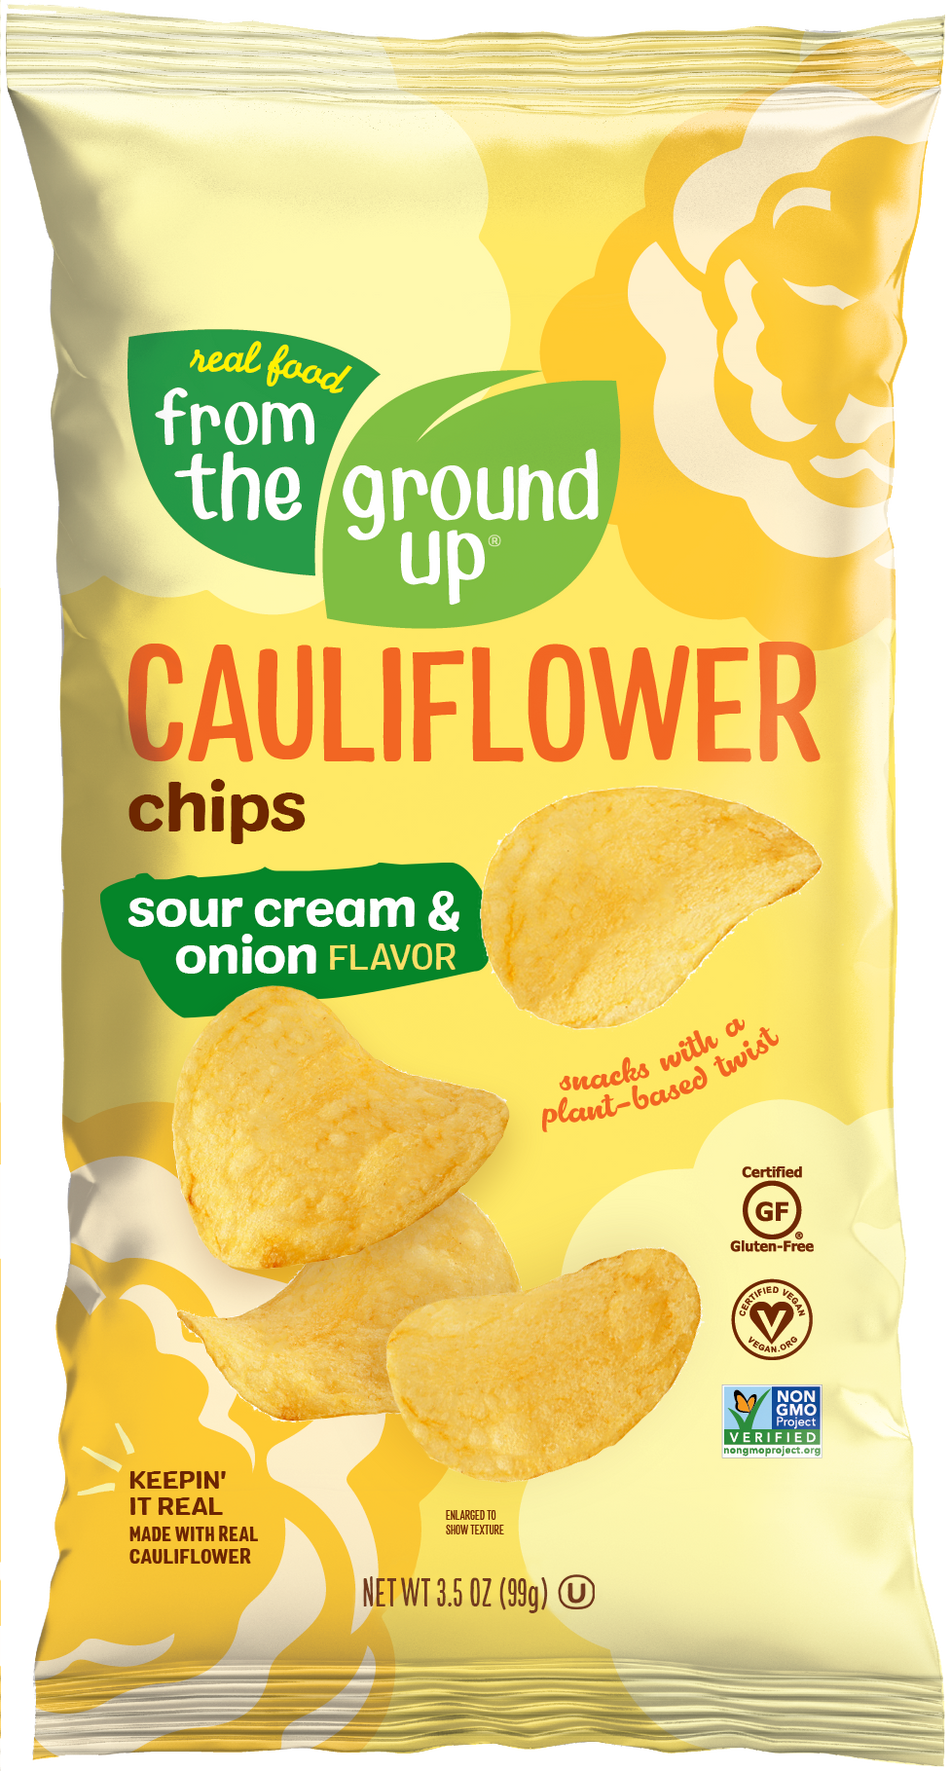 From the Ground Up Sour Cream & Onion Cauliflower Chips